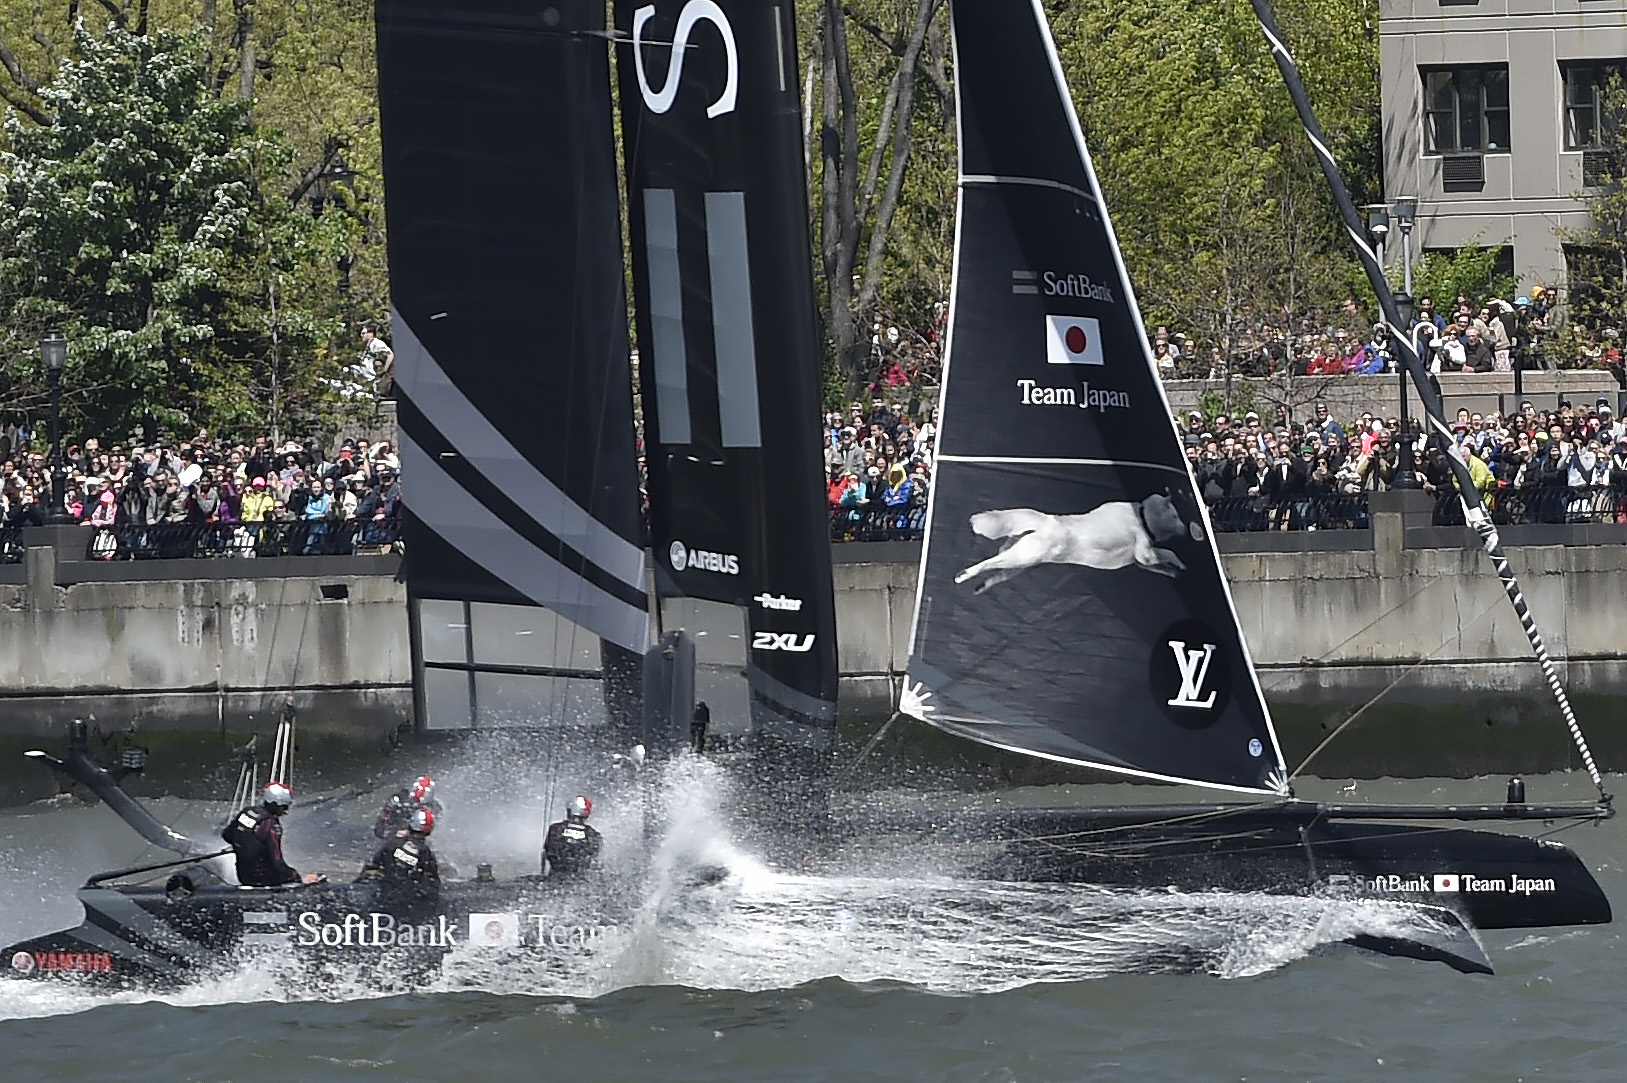 America's Cup - Emirates Team NZ to play catch up in Toulon